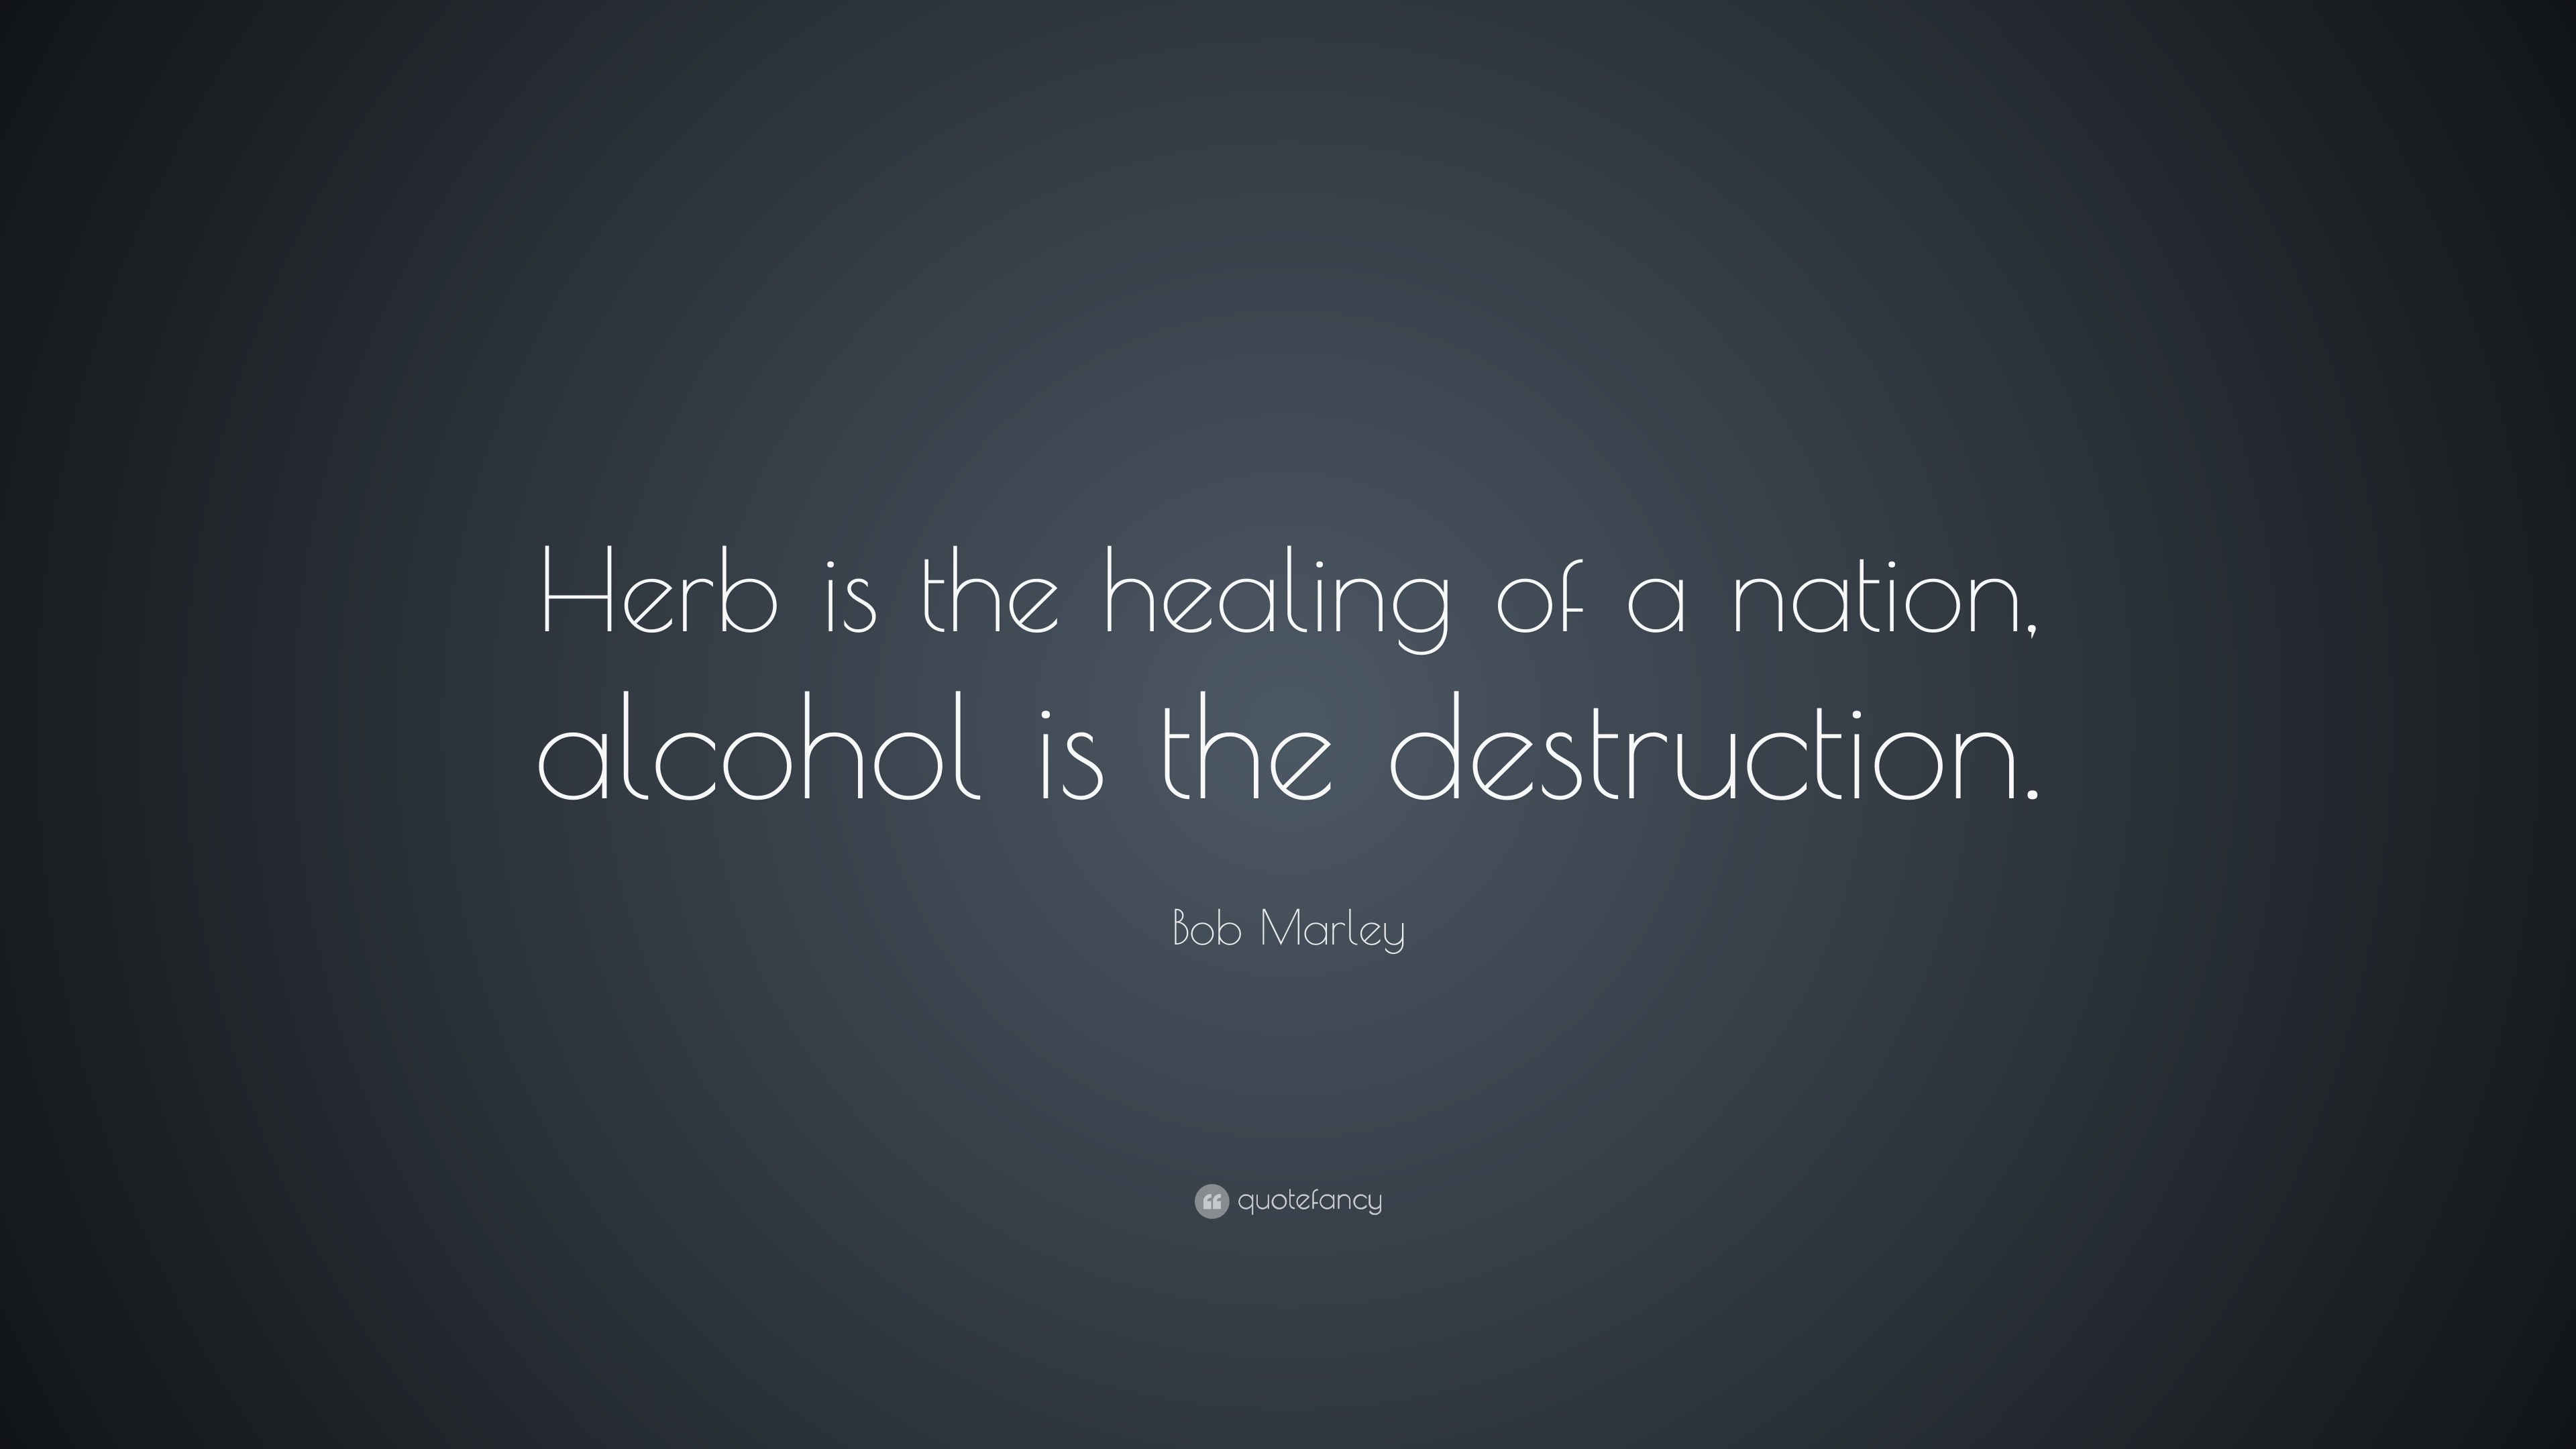 3840x2160 Bob Marley Quote: “Herb is the healing of a nation, alcohol is the